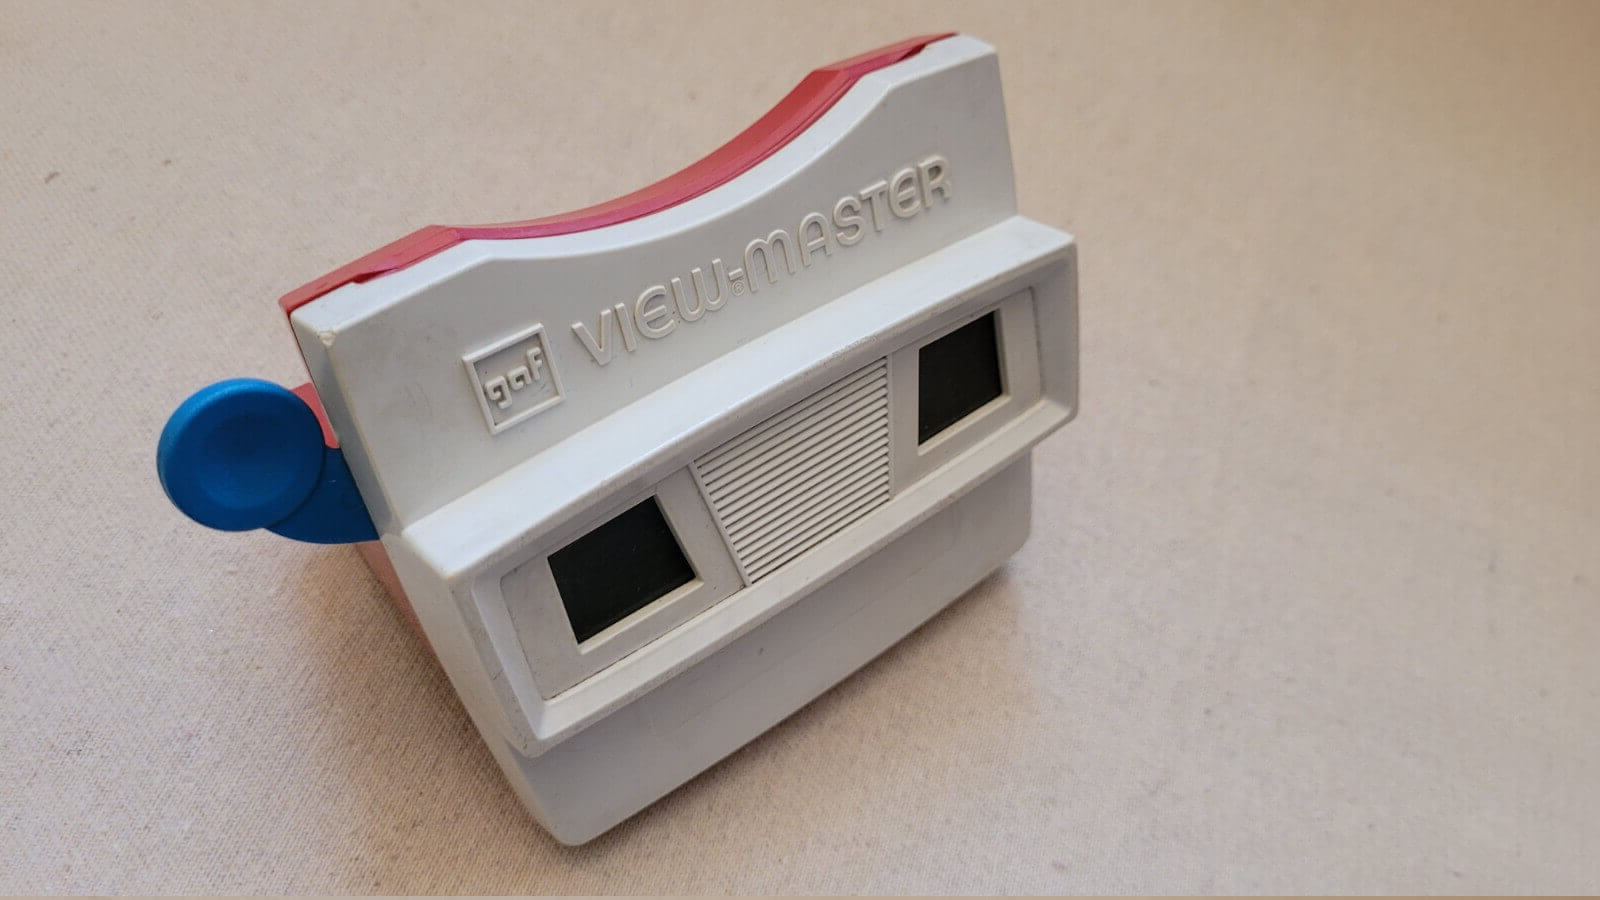 Vintage 70s GAF View-Master reel viewer, red and white color and blue handle